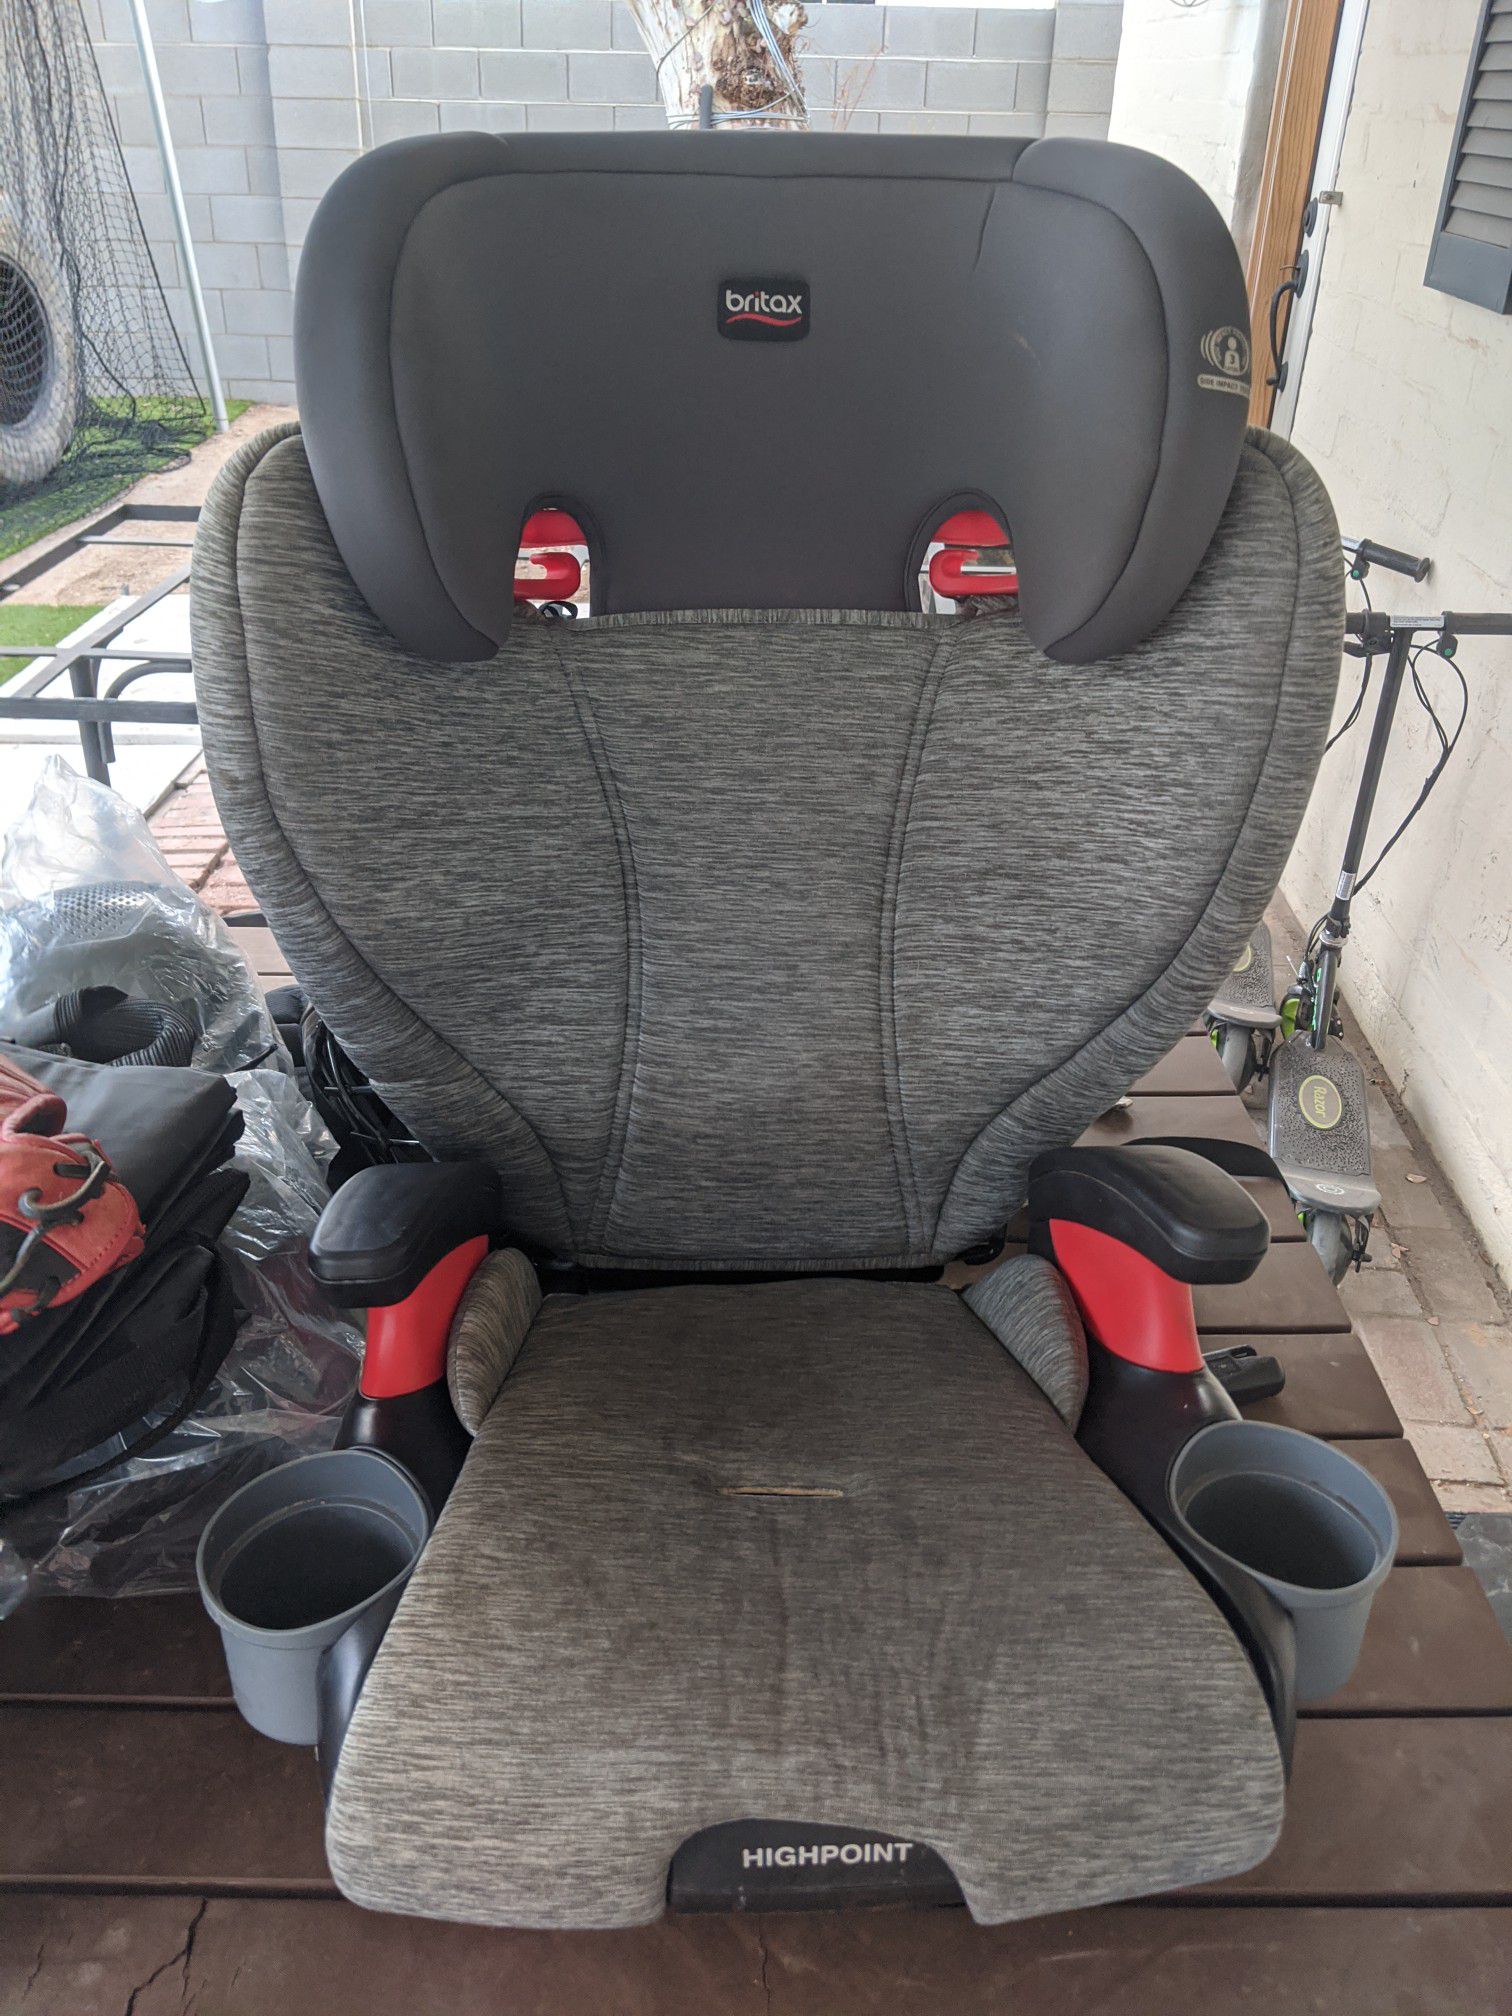 Britax booster seat with back newer